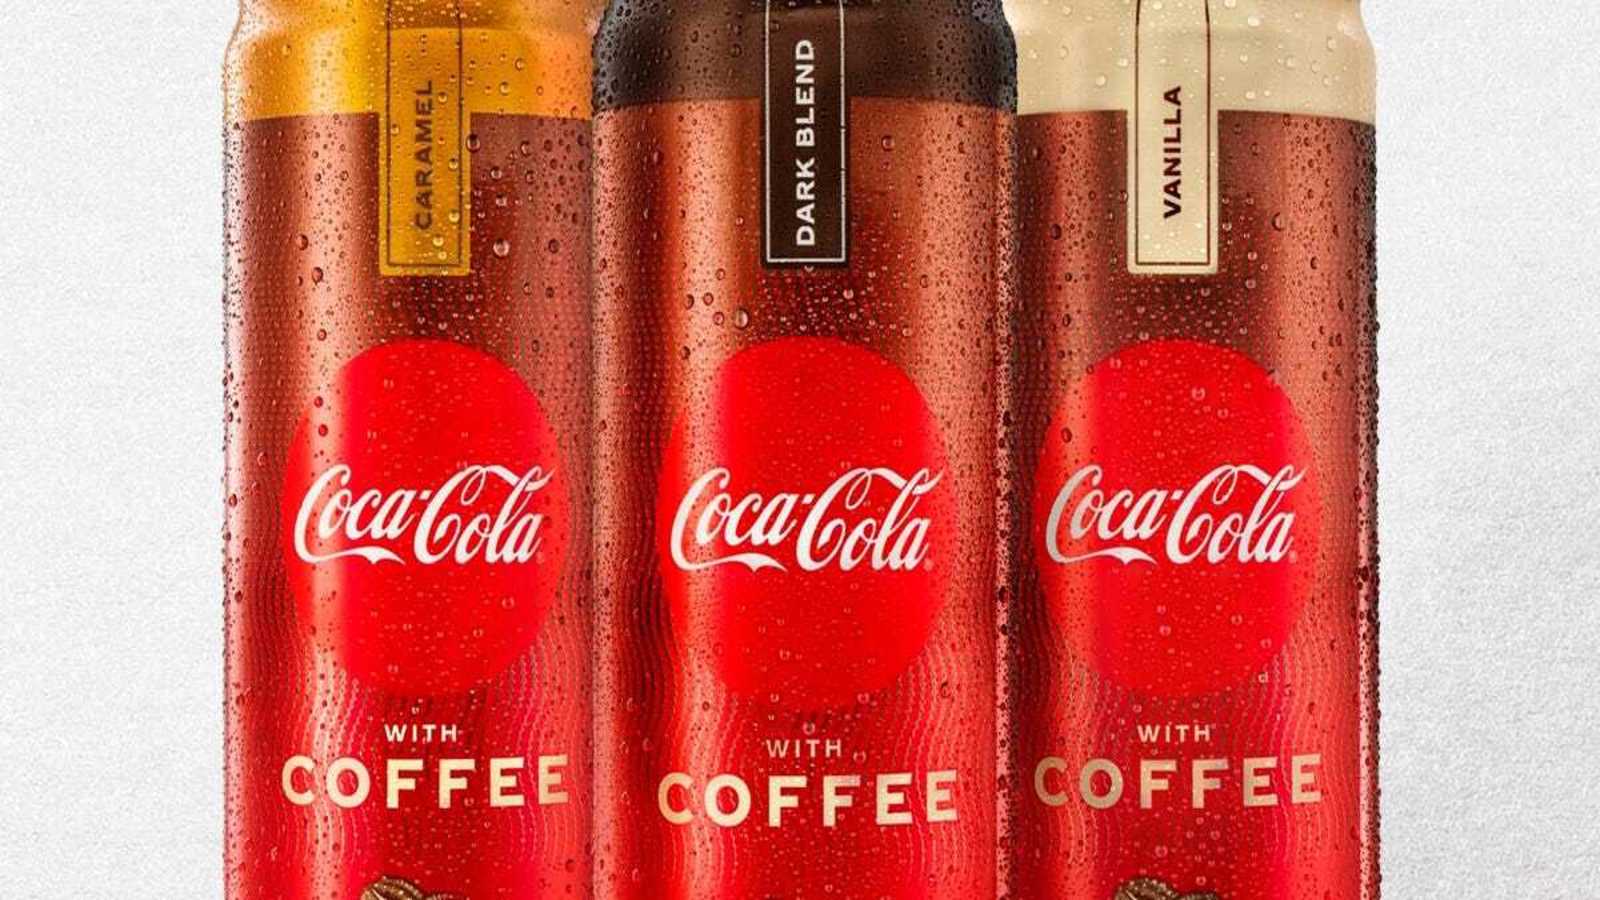 Coca-Cola introduces coffee-infused soft drinks in US market following success abroad